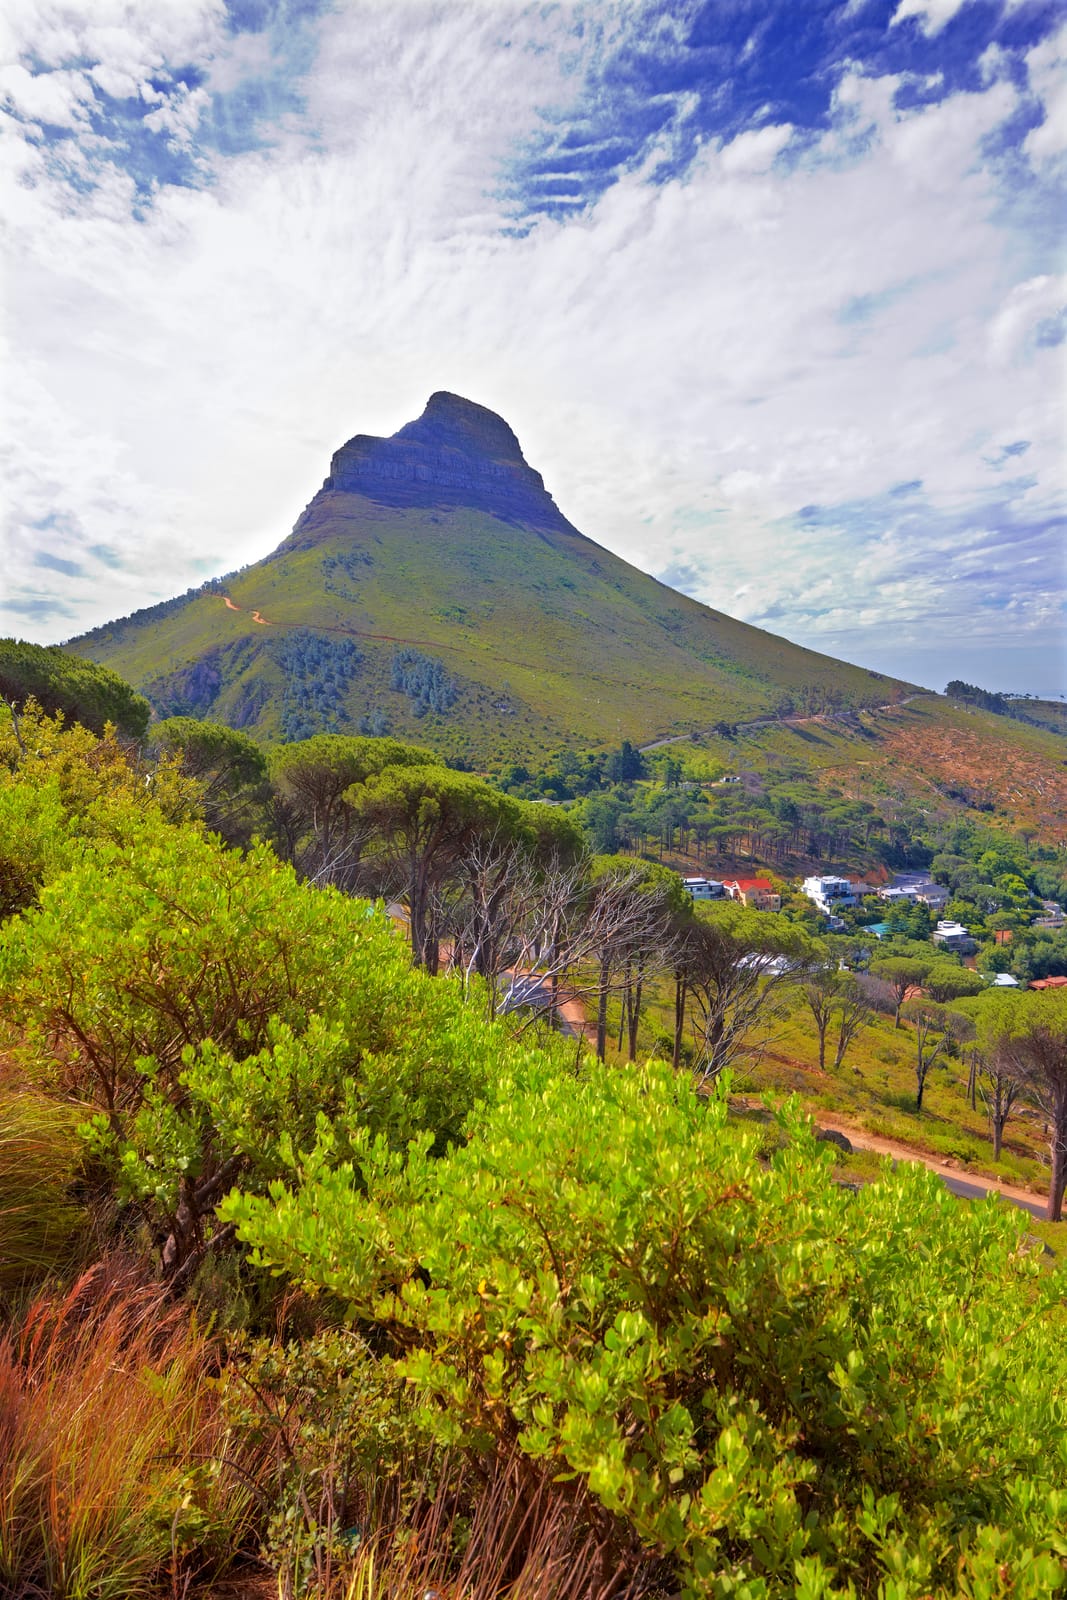 About our Cape Town Day Trips